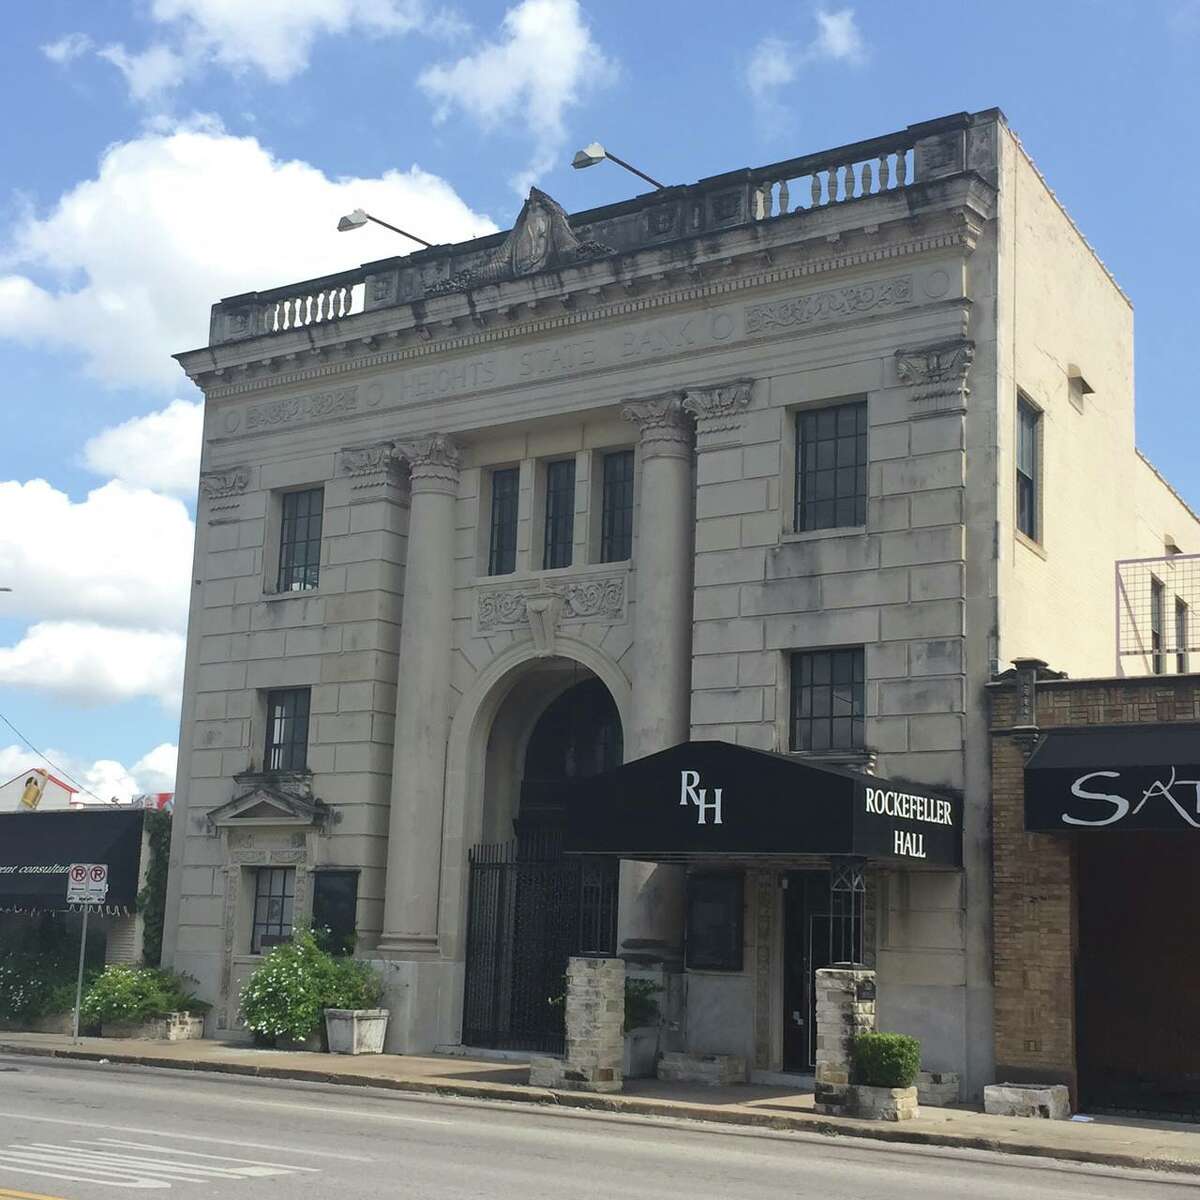 Soon Rockefeller's on Washington Avenue will come humming back to life as a full-time music venue, according to word this week from one of its new bookers, July 26, 2016.